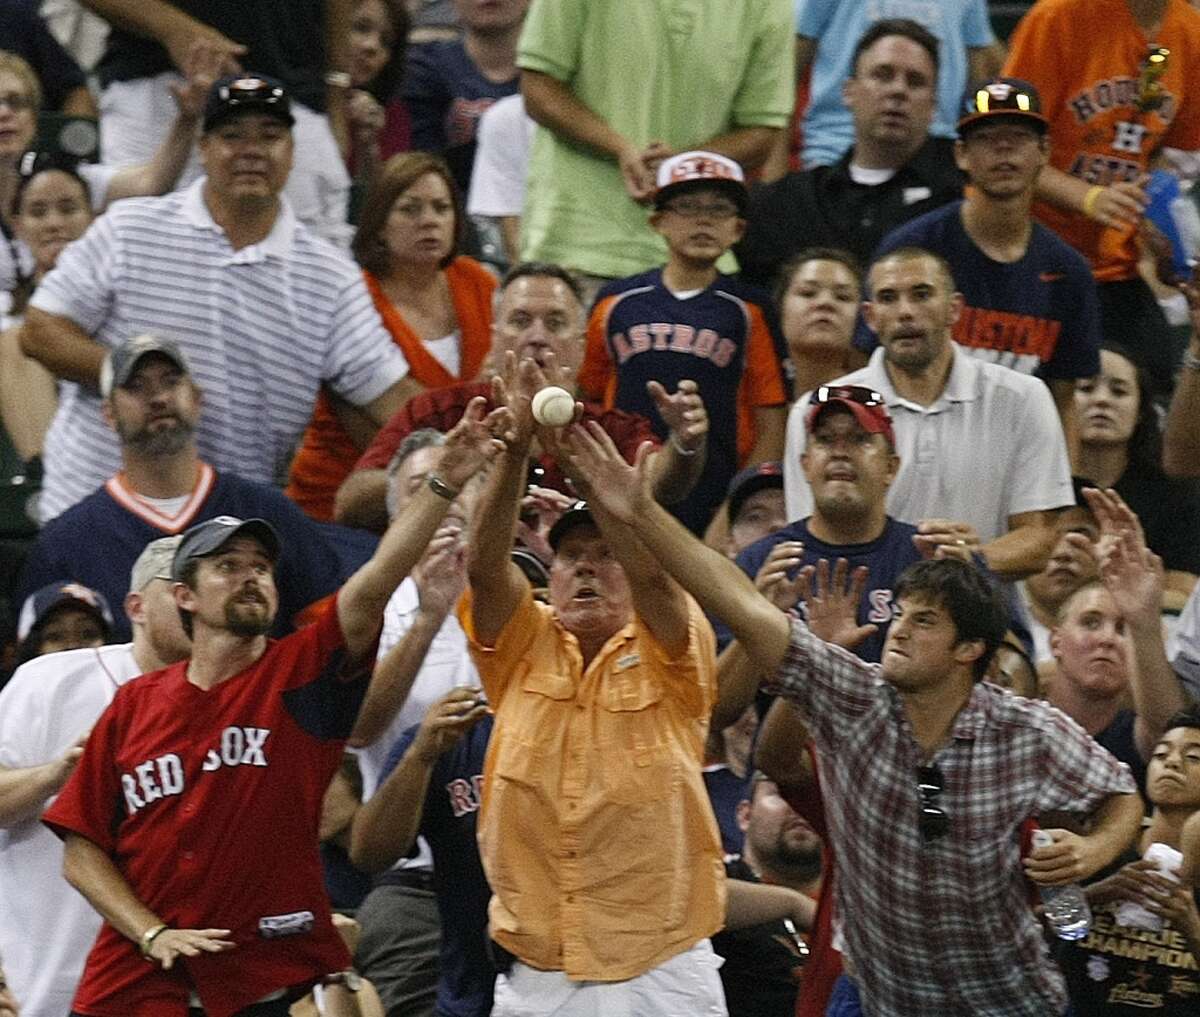 MLB: Boston Red Sox They started showing up in droves after the Red Sox ended an 86-year championship drought in 2004. Remember the horrific moment when the Astros played Red Sox anthem "Sweet Caroline" at Minute Maid Park during a Boston visit overrun with Red Sox fans? It's like the Red Sox lost their identity when they started winning championships and attracting bandwagon fans.